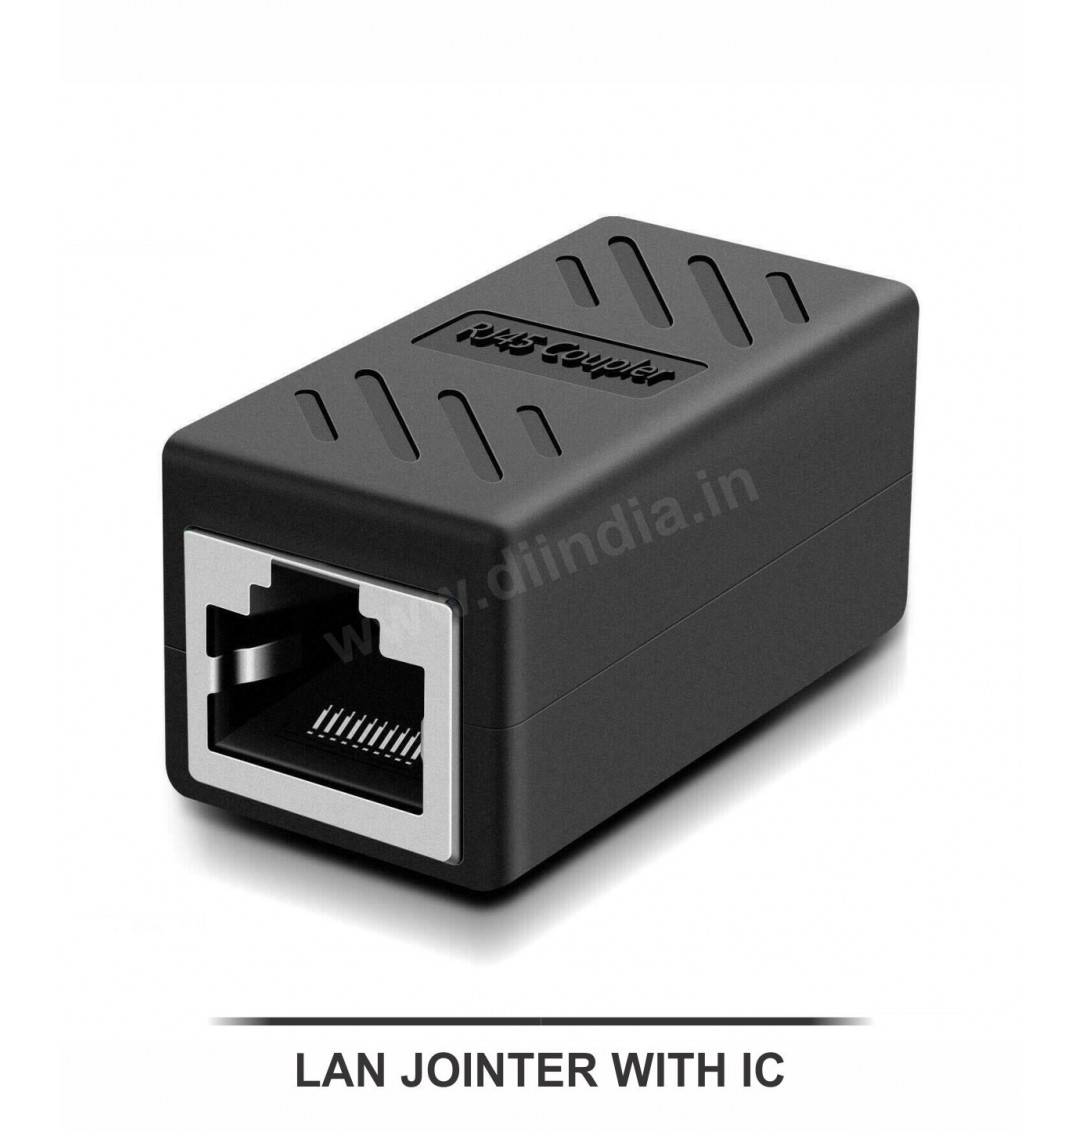 LAN JOINTER WITH IC